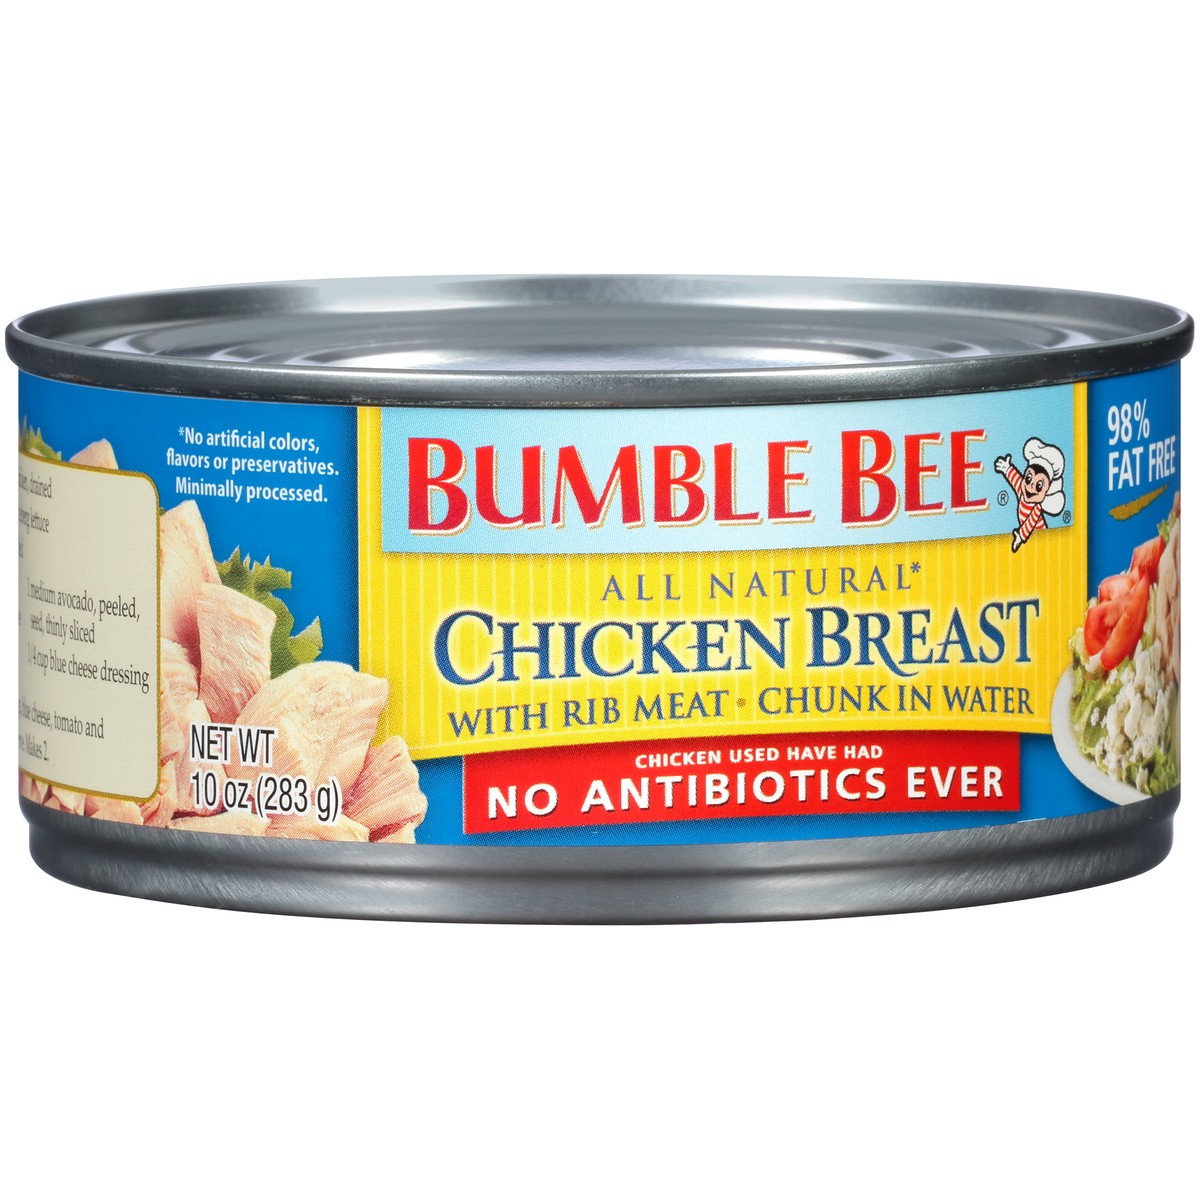 slide 4 of 11, Bumble Bee All Natural Chicken Breast with Rib Meat Chunk in Water Chicken Breas, 10 oz